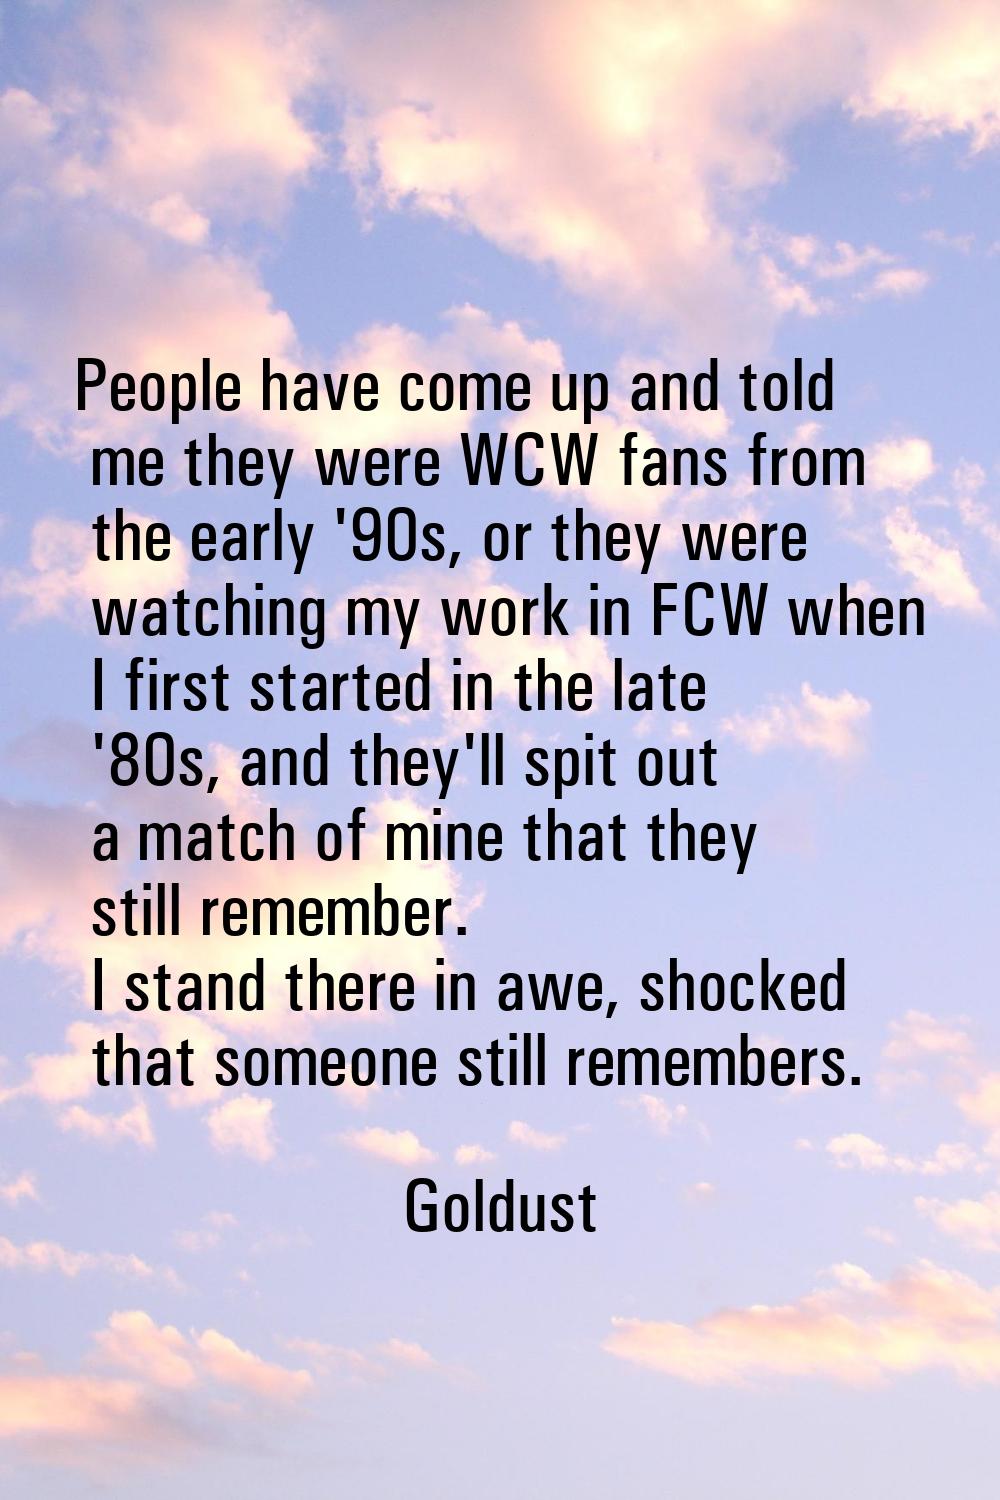 People have come up and told me they were WCW fans from the early '90s, or they were watching my wo